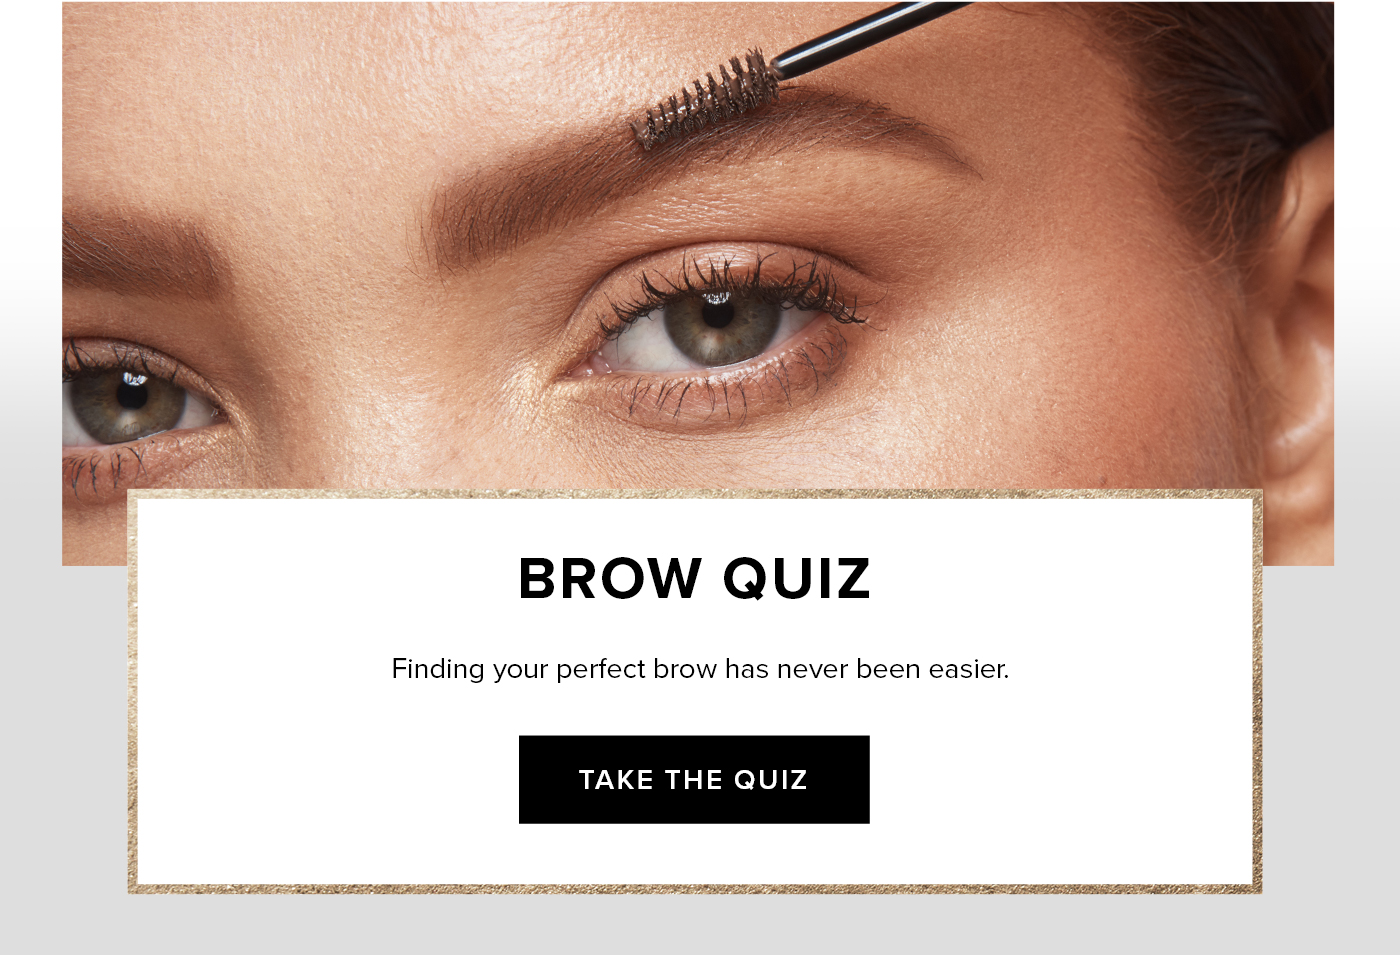 Finding your perfect brow has never been easier. Take the quiz.